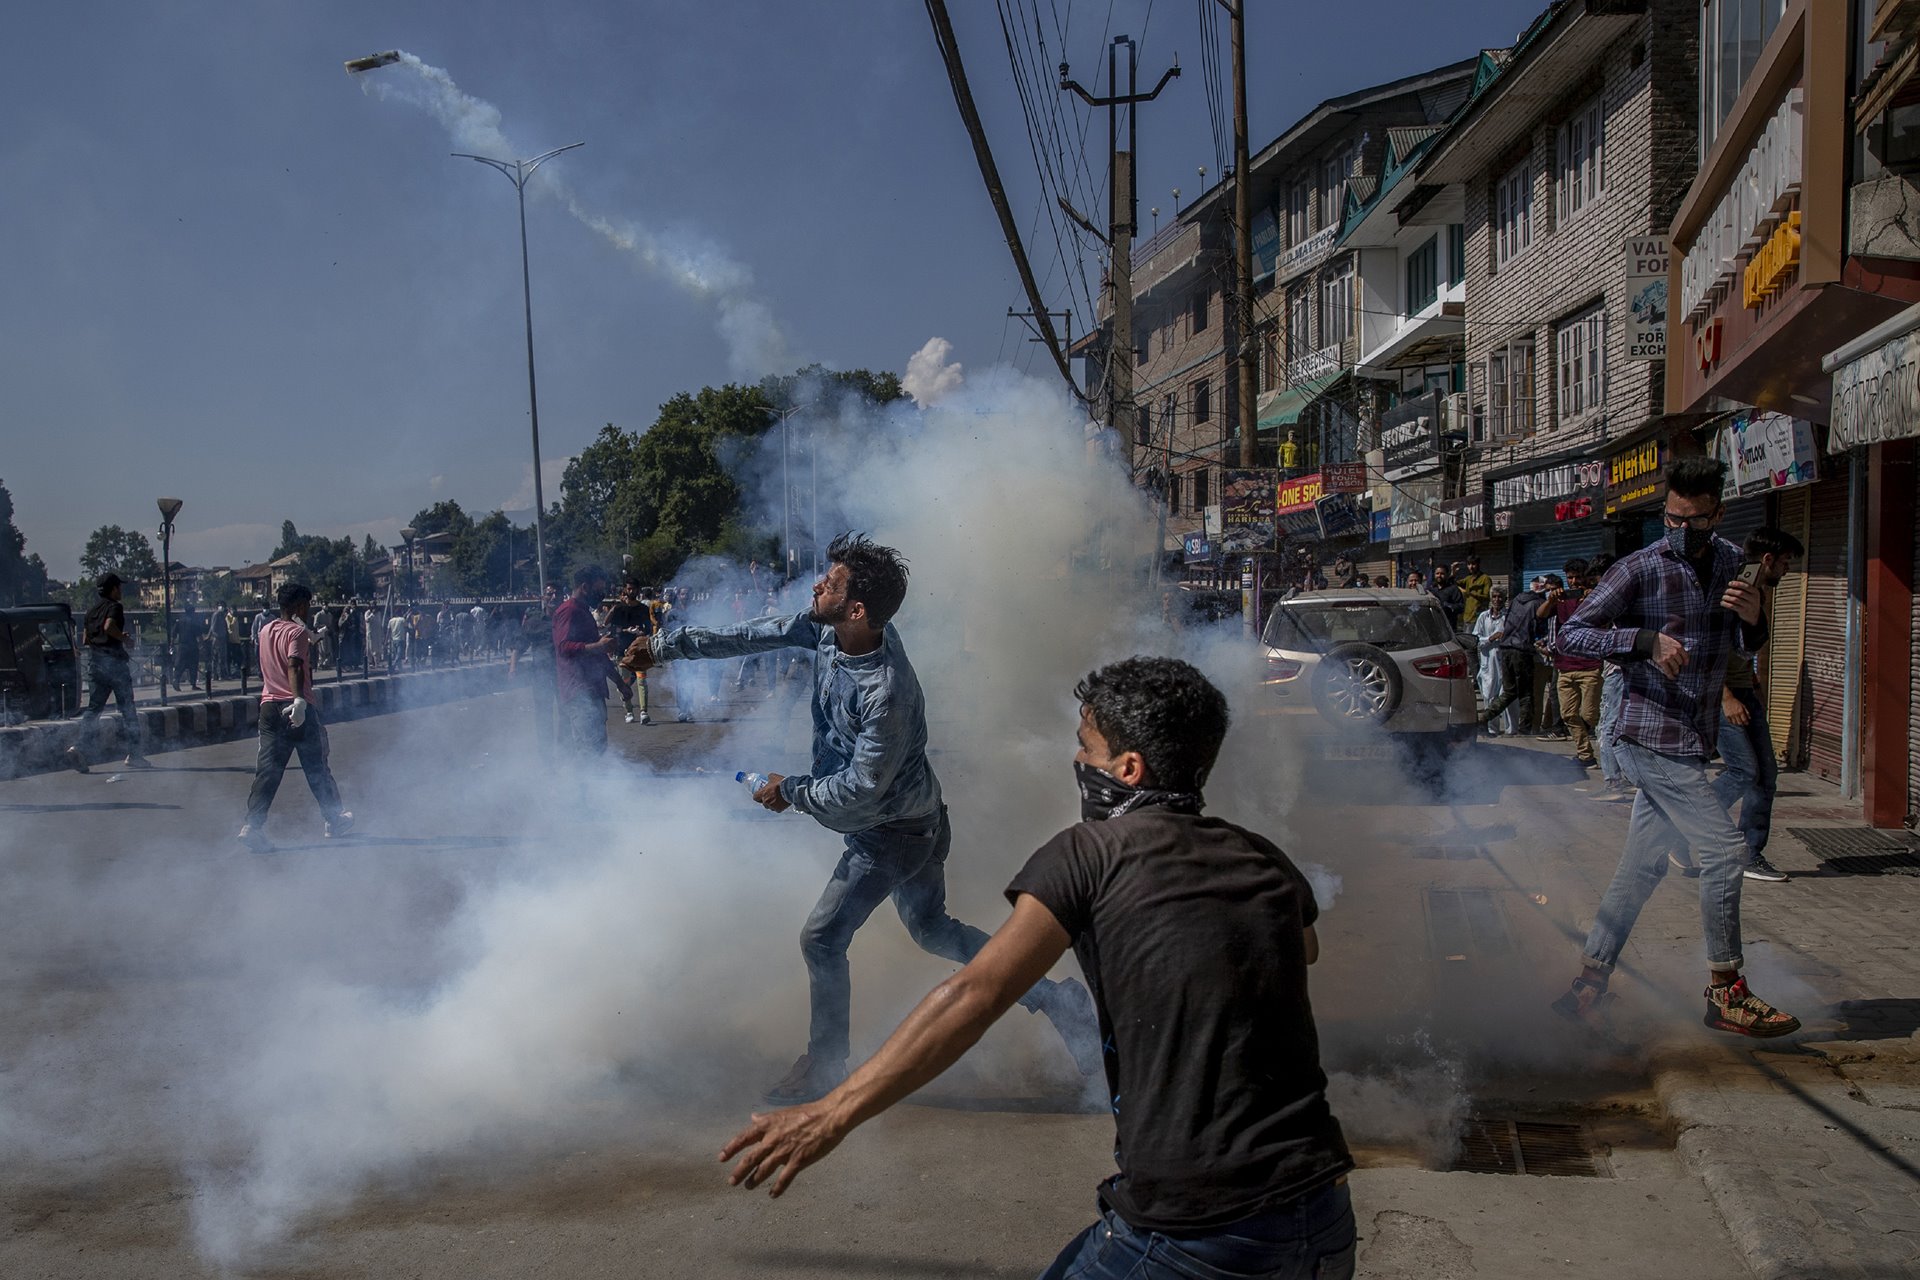 A man throws back a tear-gas canister fired by Indian police during a religious procession in central Srinagar, in Indian-administered Kashmir. Police fired tear gas and warning shots to disperse hundreds of Shia Muslims, while detaining dozens who attempted to participate in processions marking the holy month of Muharram.